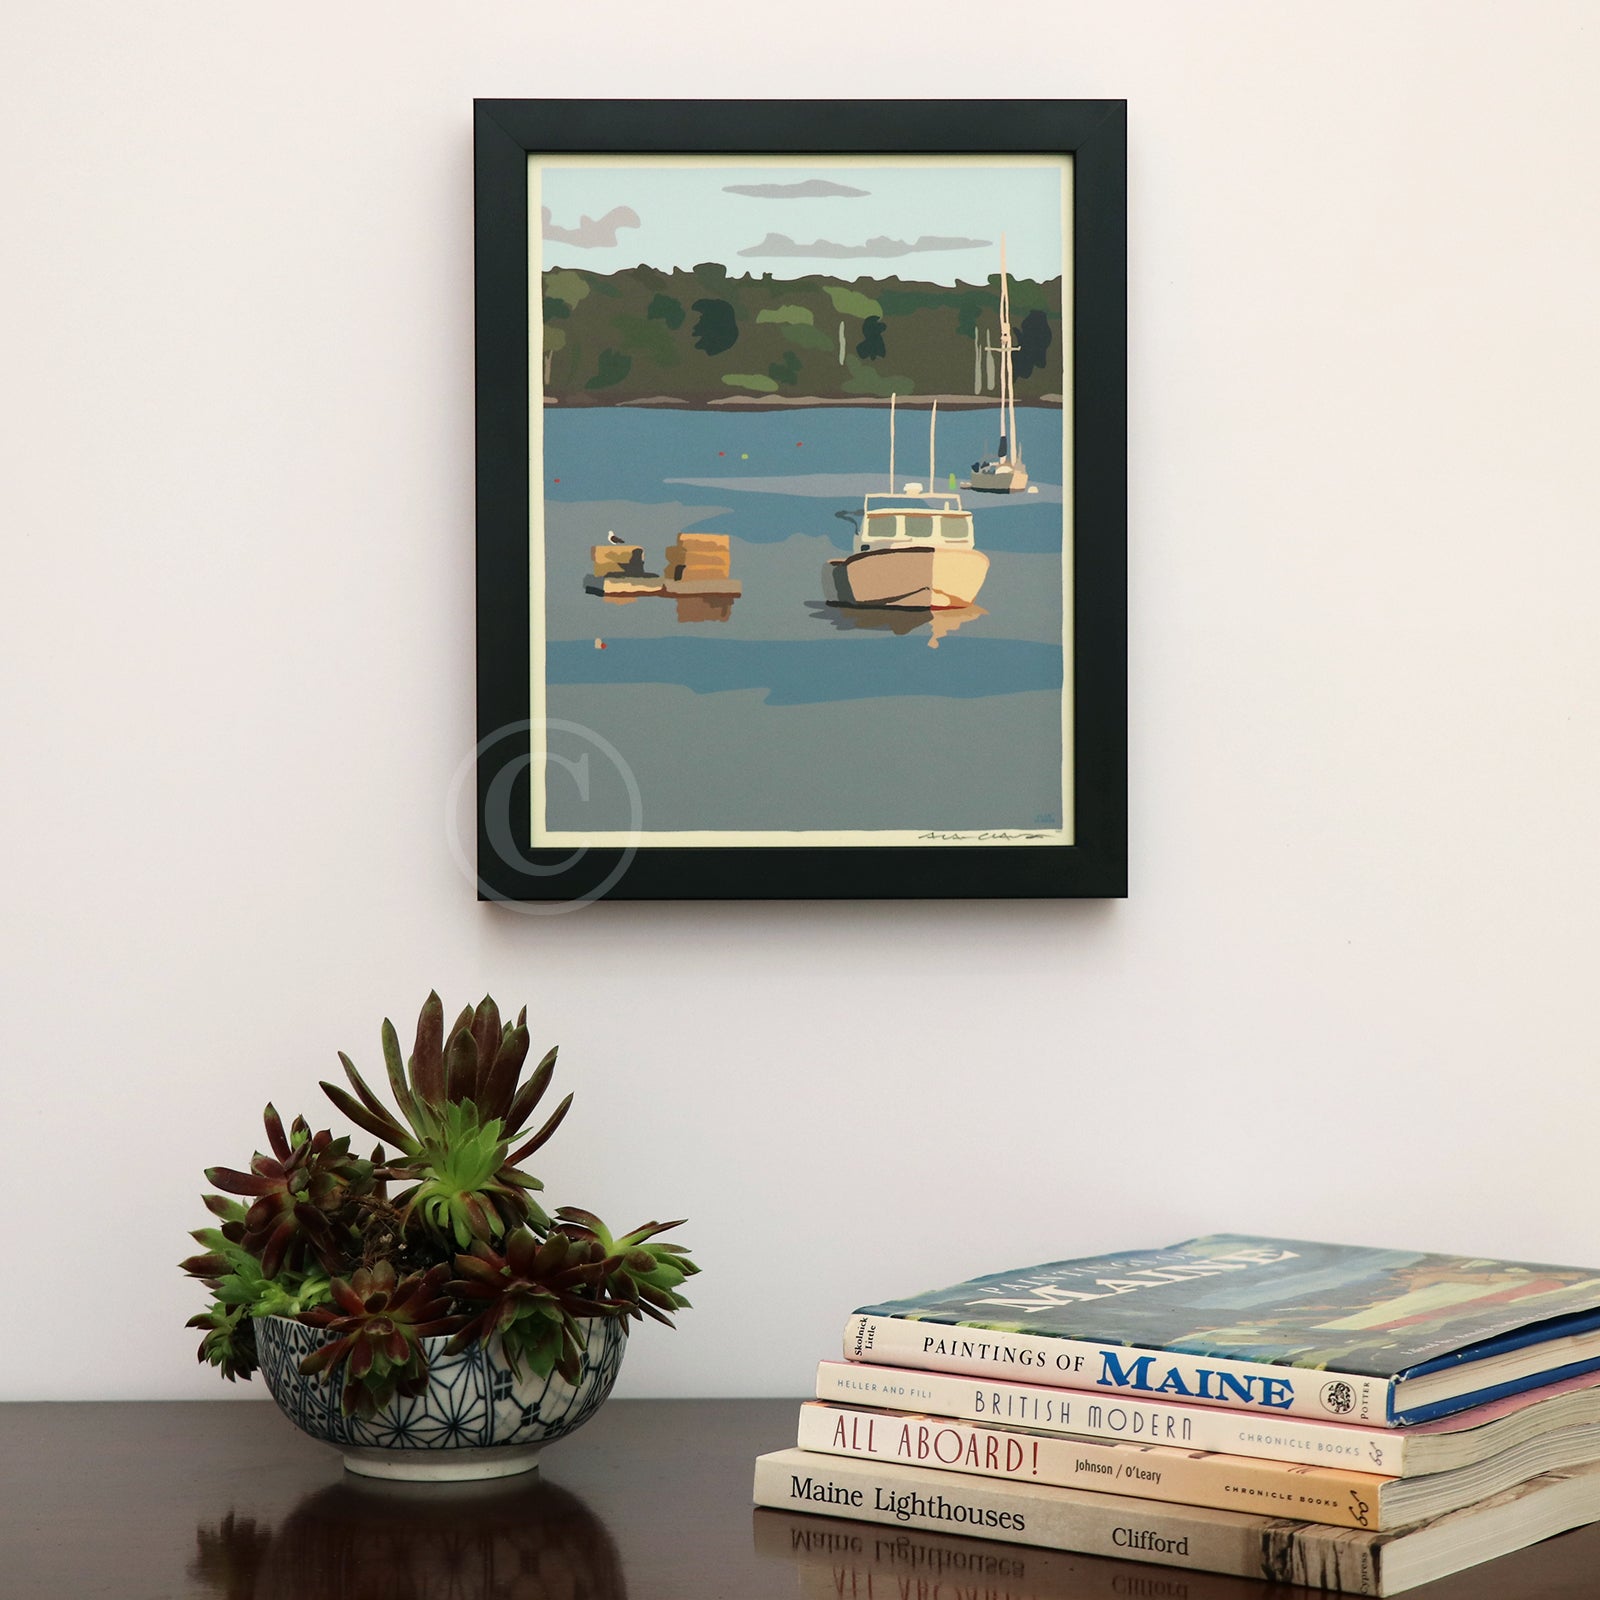 Lobster Boat in Round Pond Harbor Art Print Harbor 8" x 10" Vertical Framed Wall Poster By Alan Claude - Maine